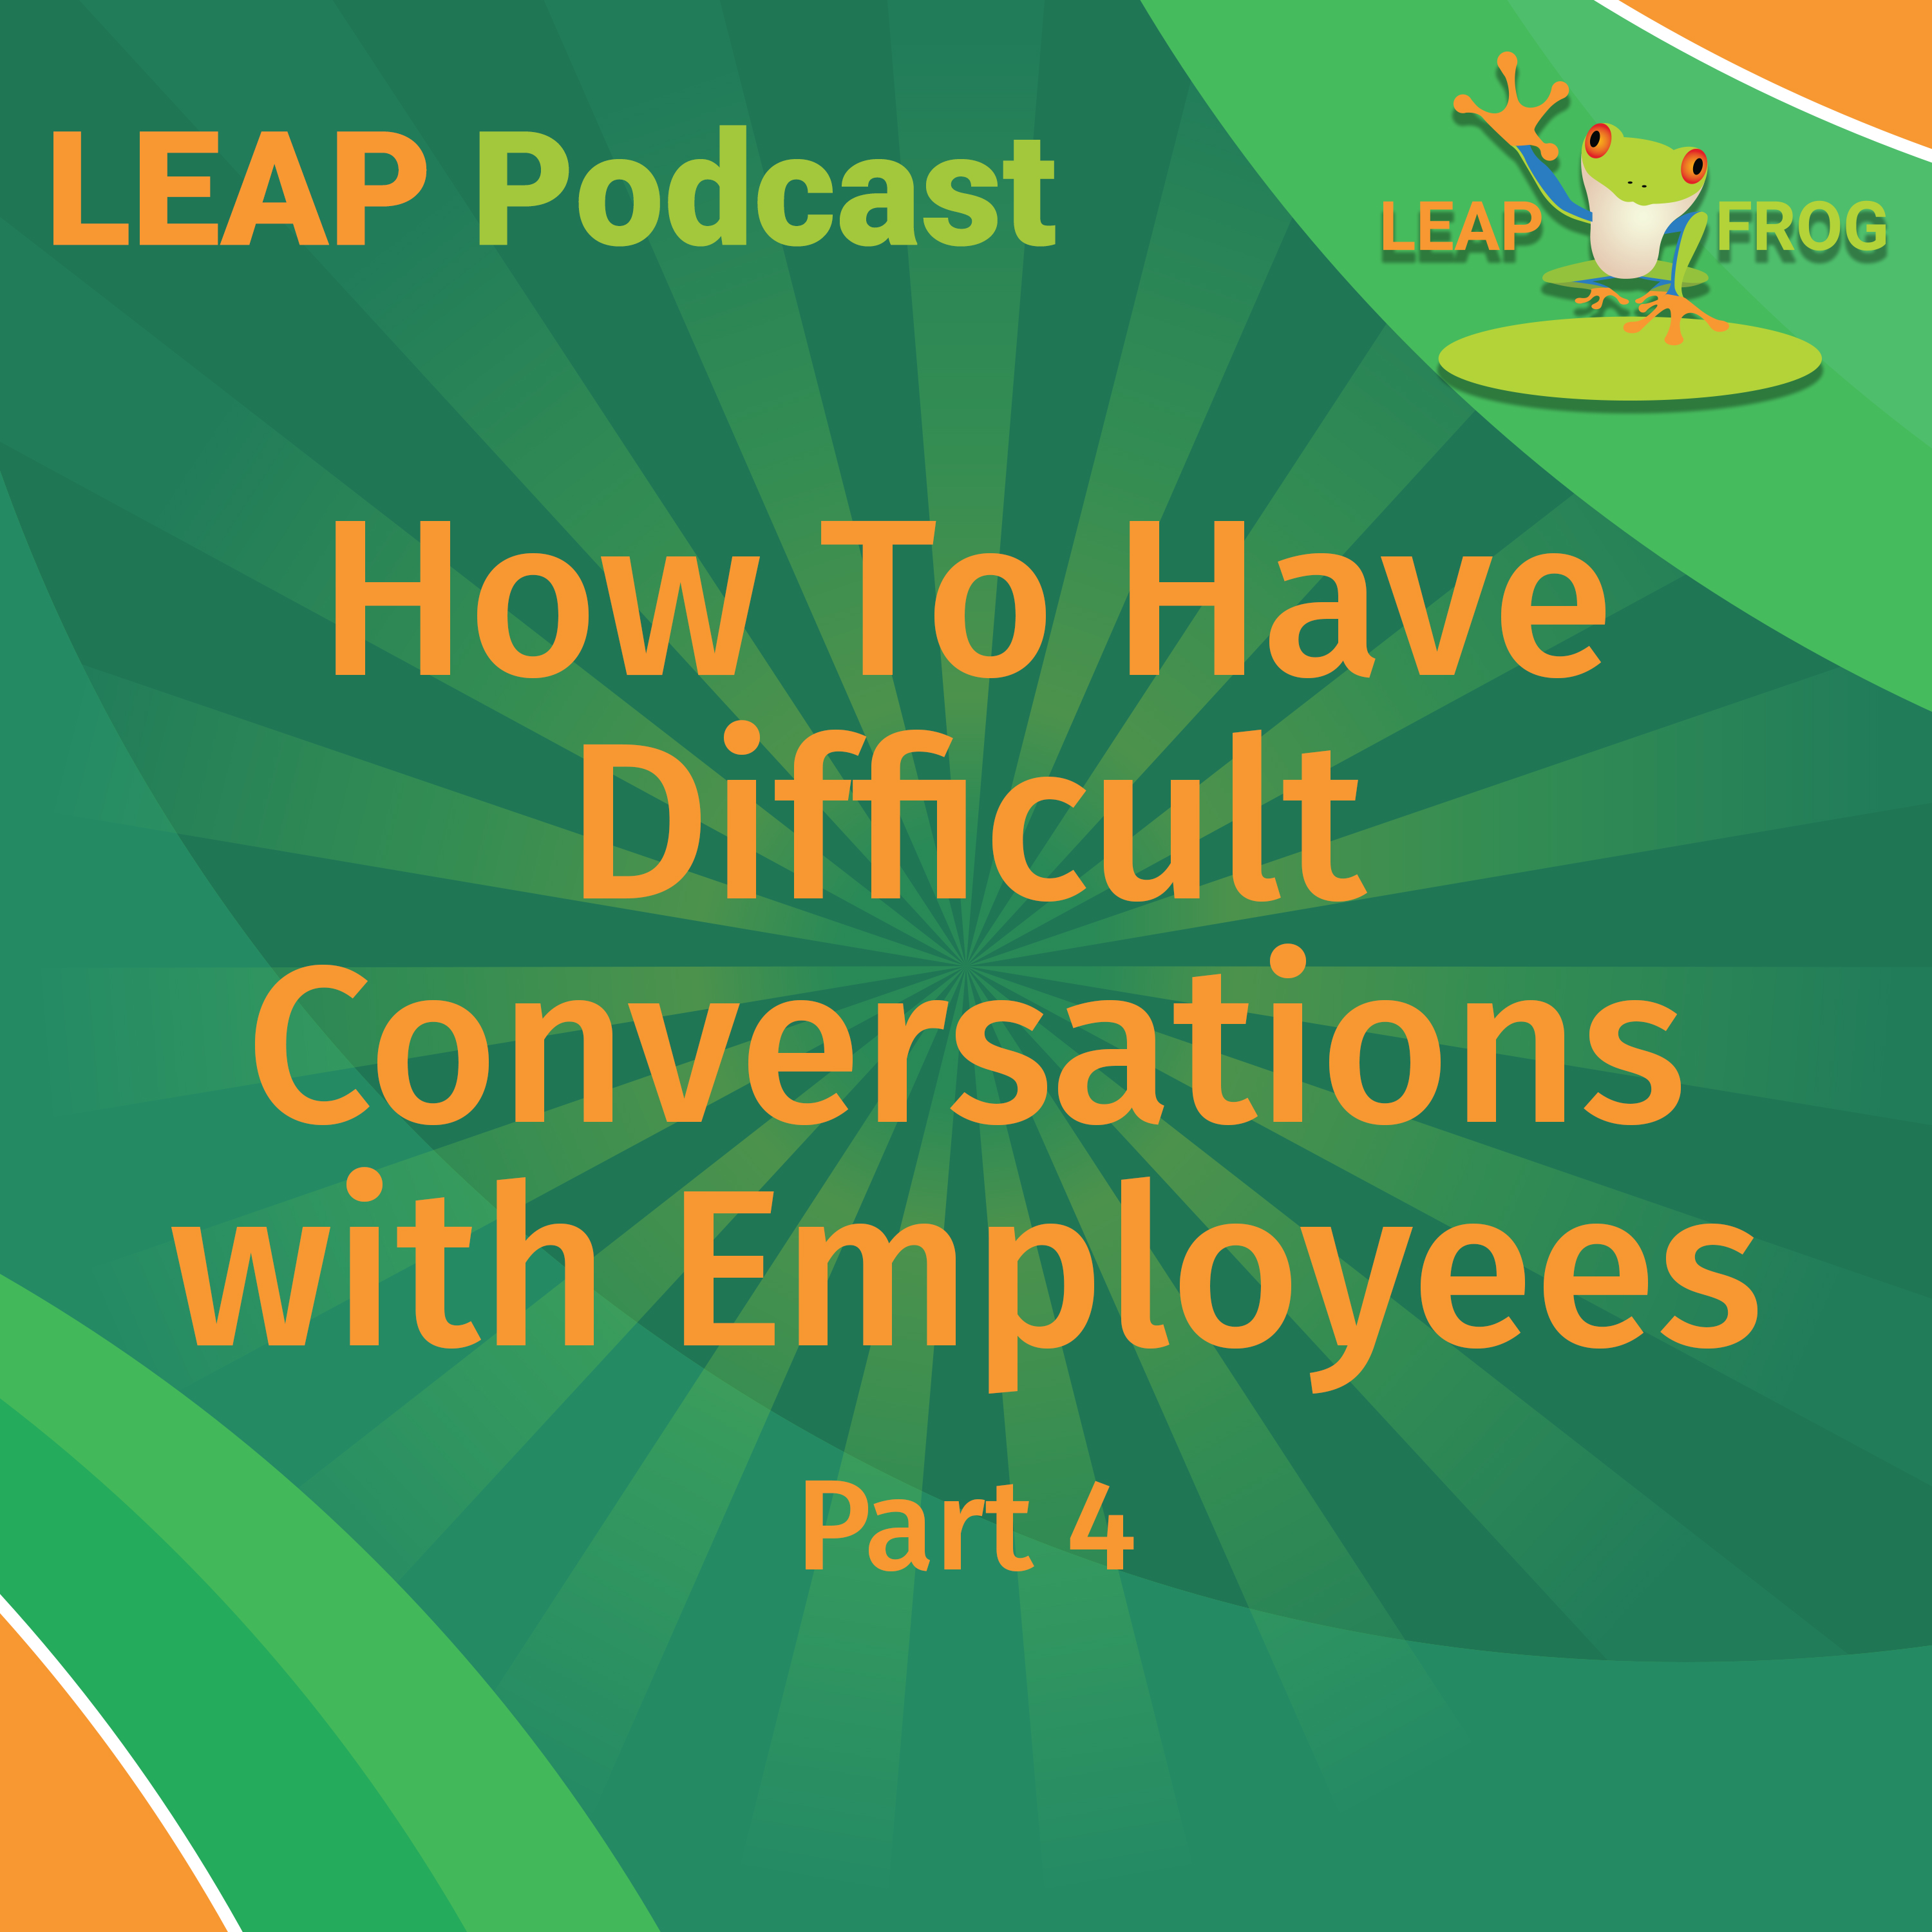 LEAP Podcast How To Have Difficult Conversations with Employees part 4 episode cover art